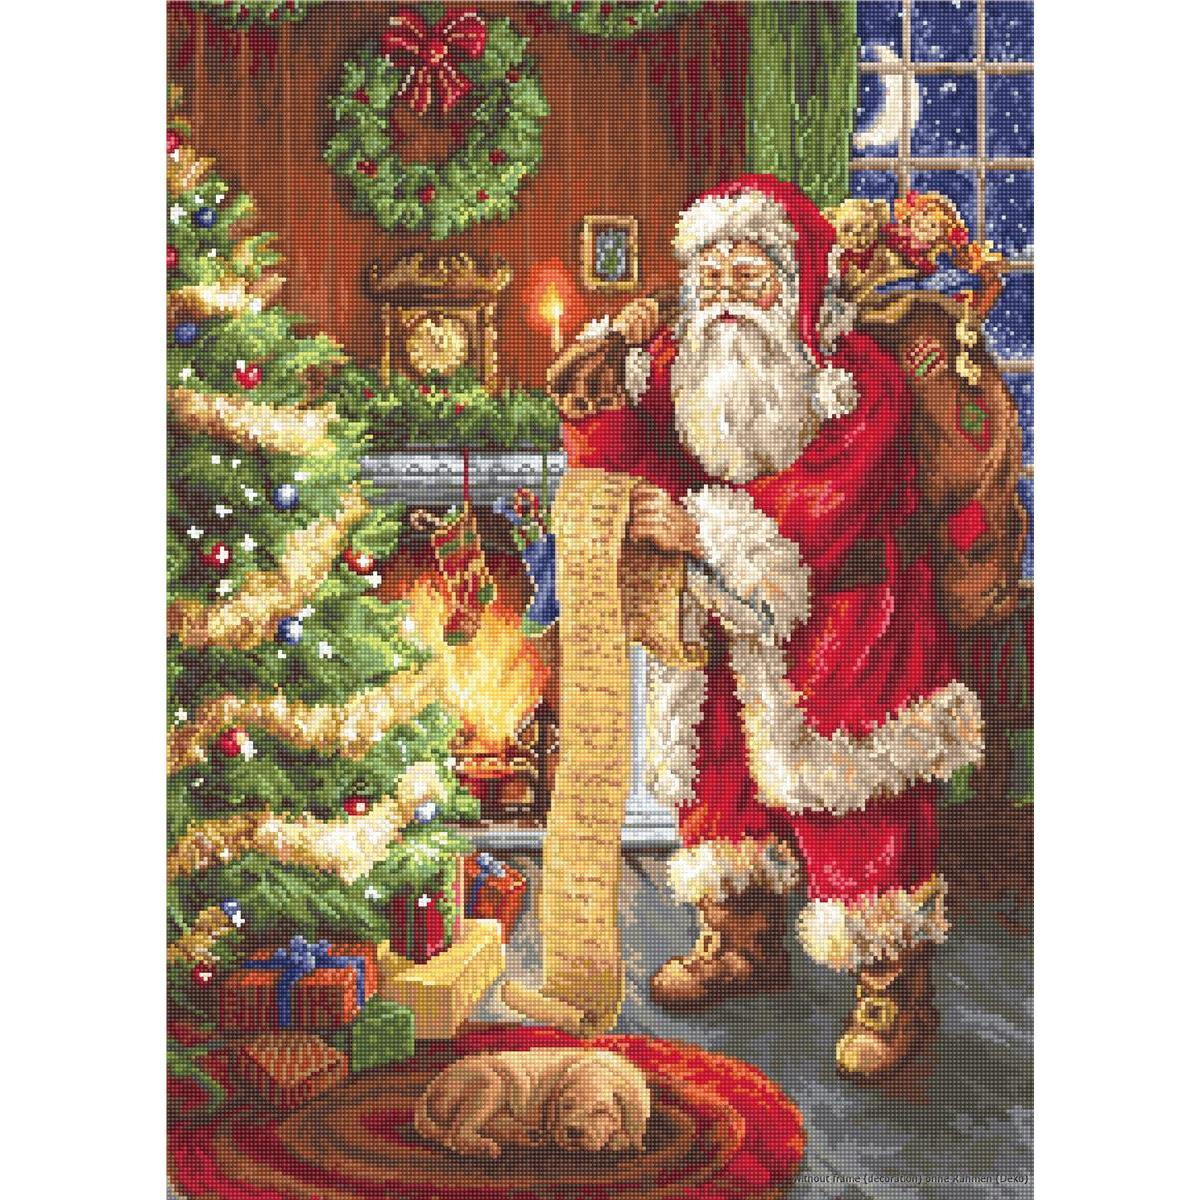 Luca-S counted Cross Stitch kit "Santa Claus...